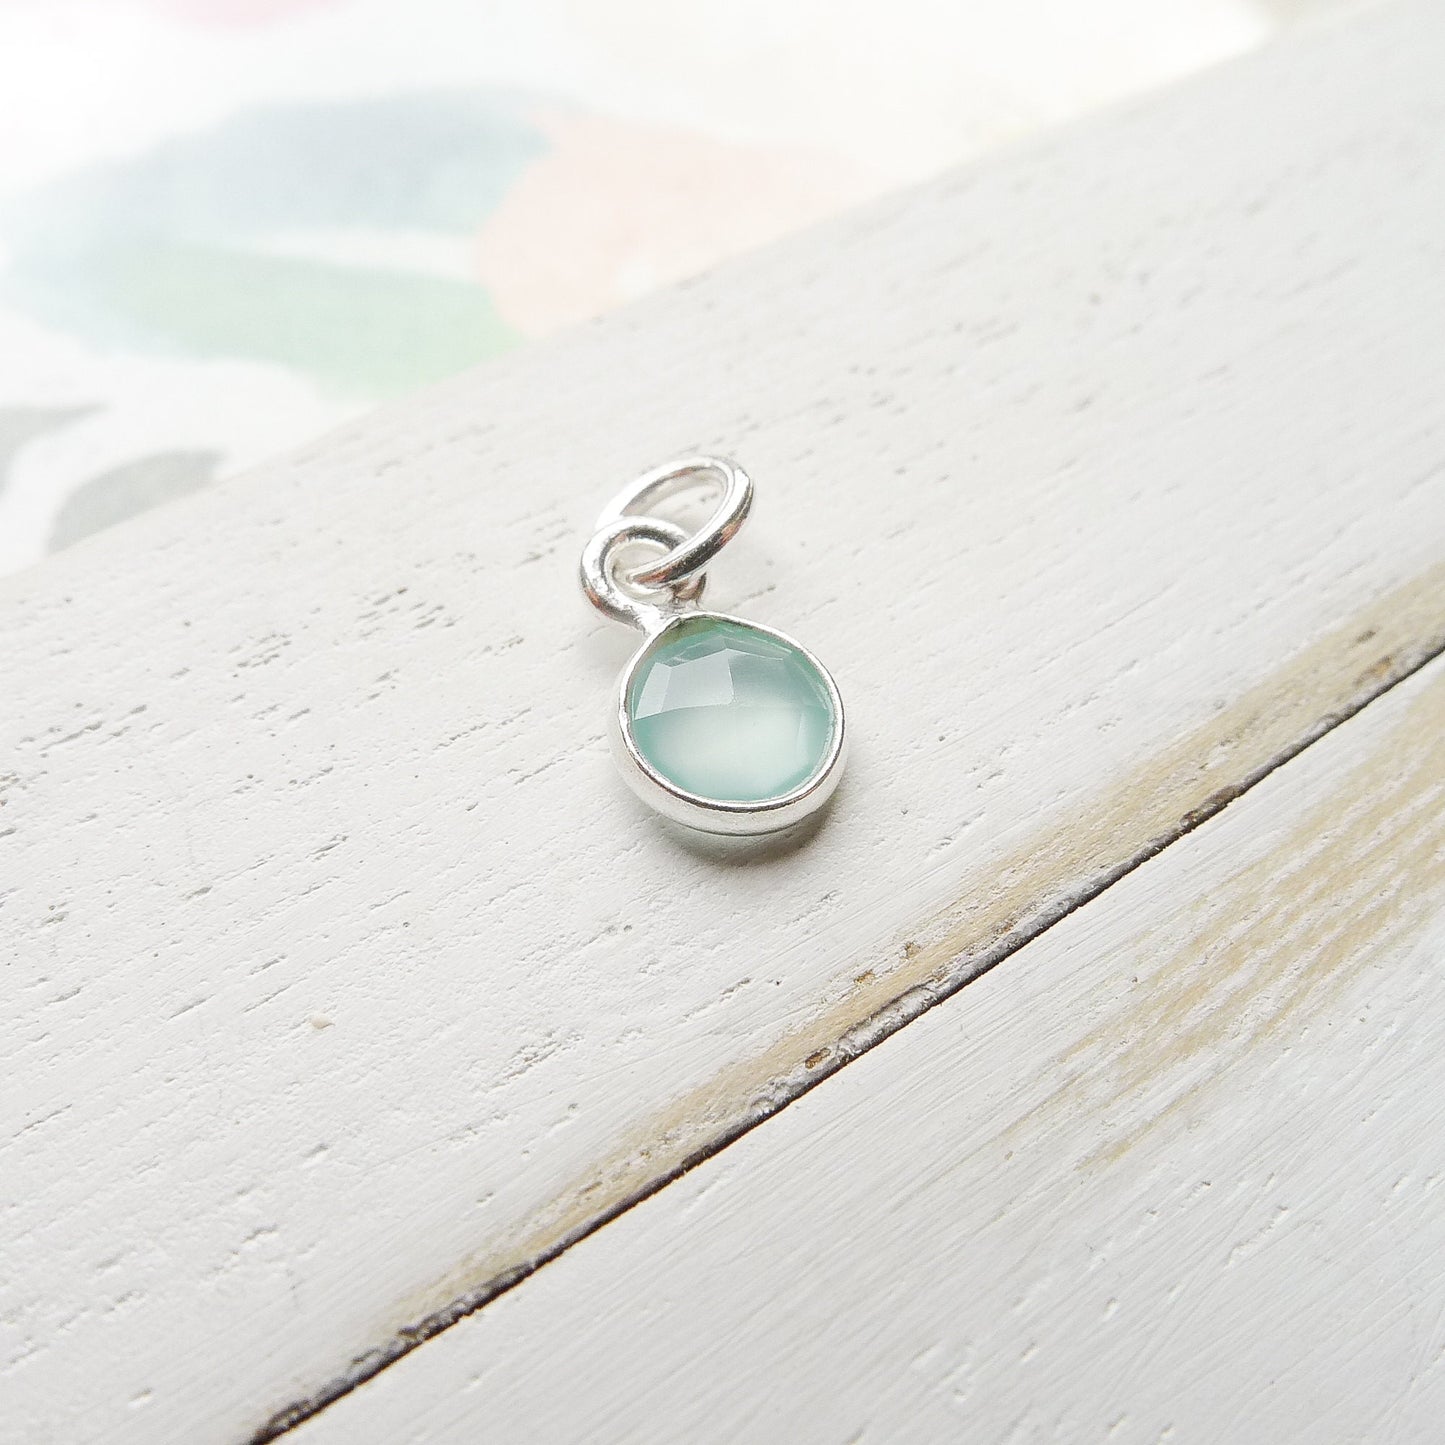 Chalcedony Charm Sea Green Faceted Stone 6mm Gemstone Pendant with Sterling Silver Bezel